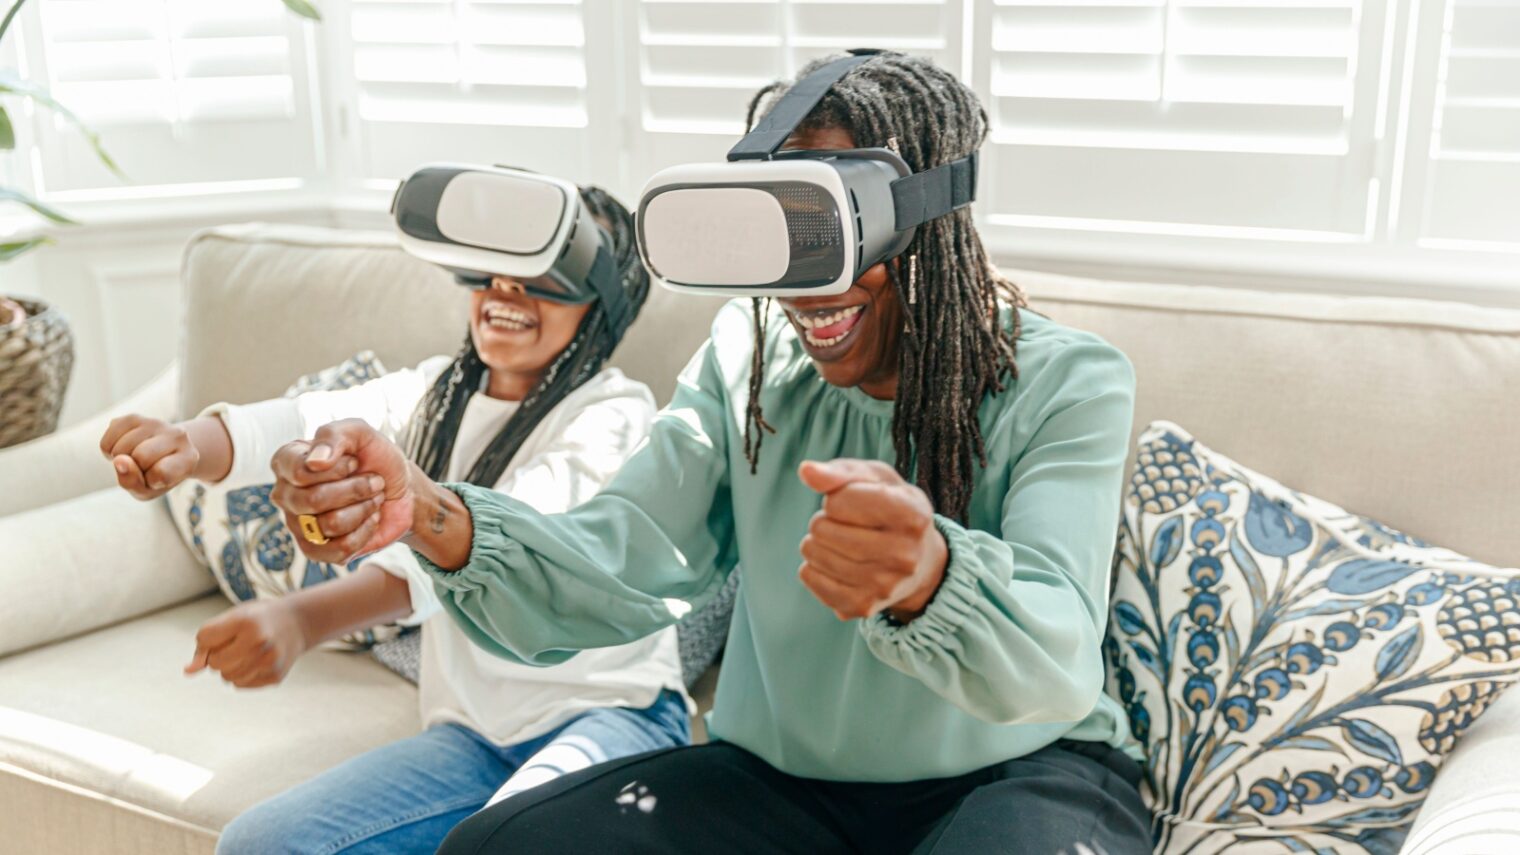 Too much VR and AR goggle use can lead to cybersickness. Photo courtesy of Eye-Minders